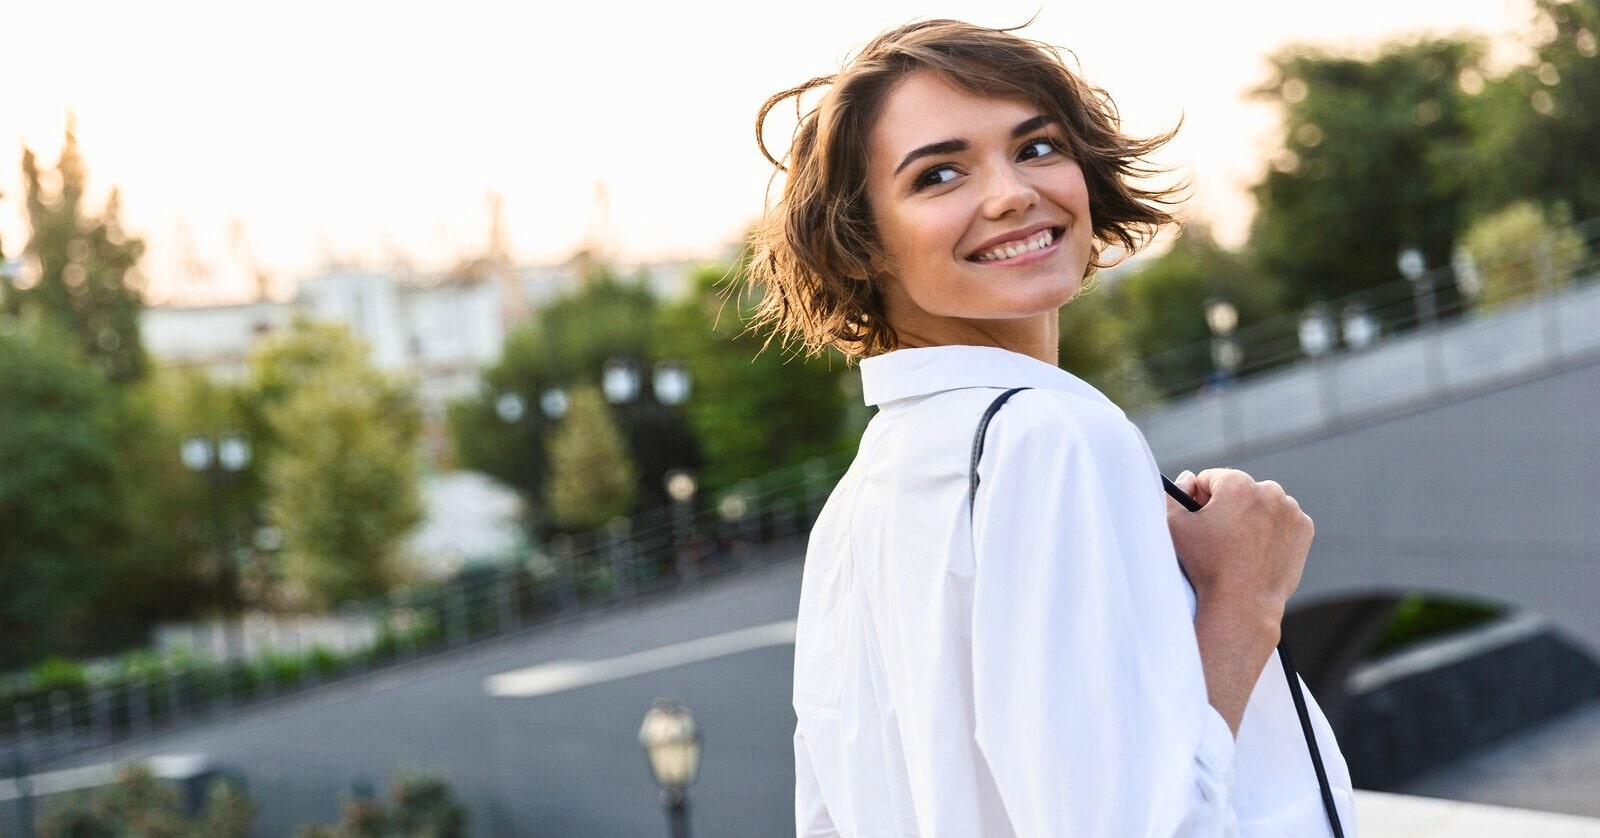 young smiling woman wearing white blouse looking over shoulder as she walks outside